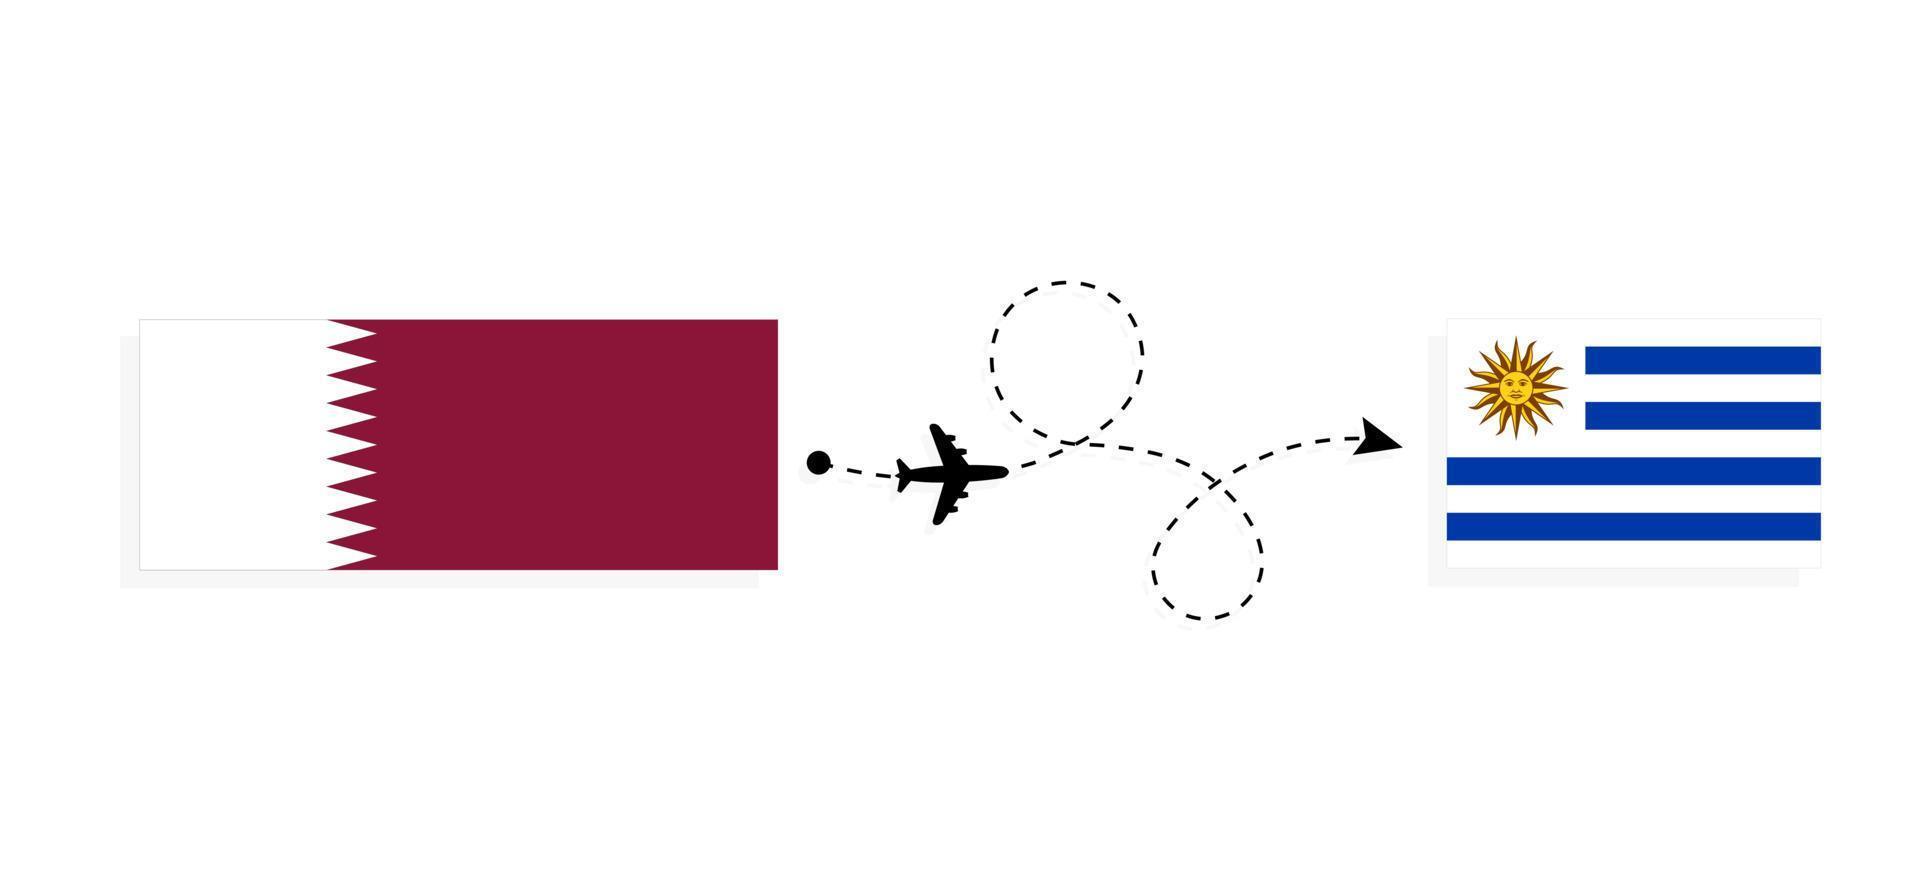 Flight and travel from Qatar to Uruguay by passenger airplane Travel concept vector